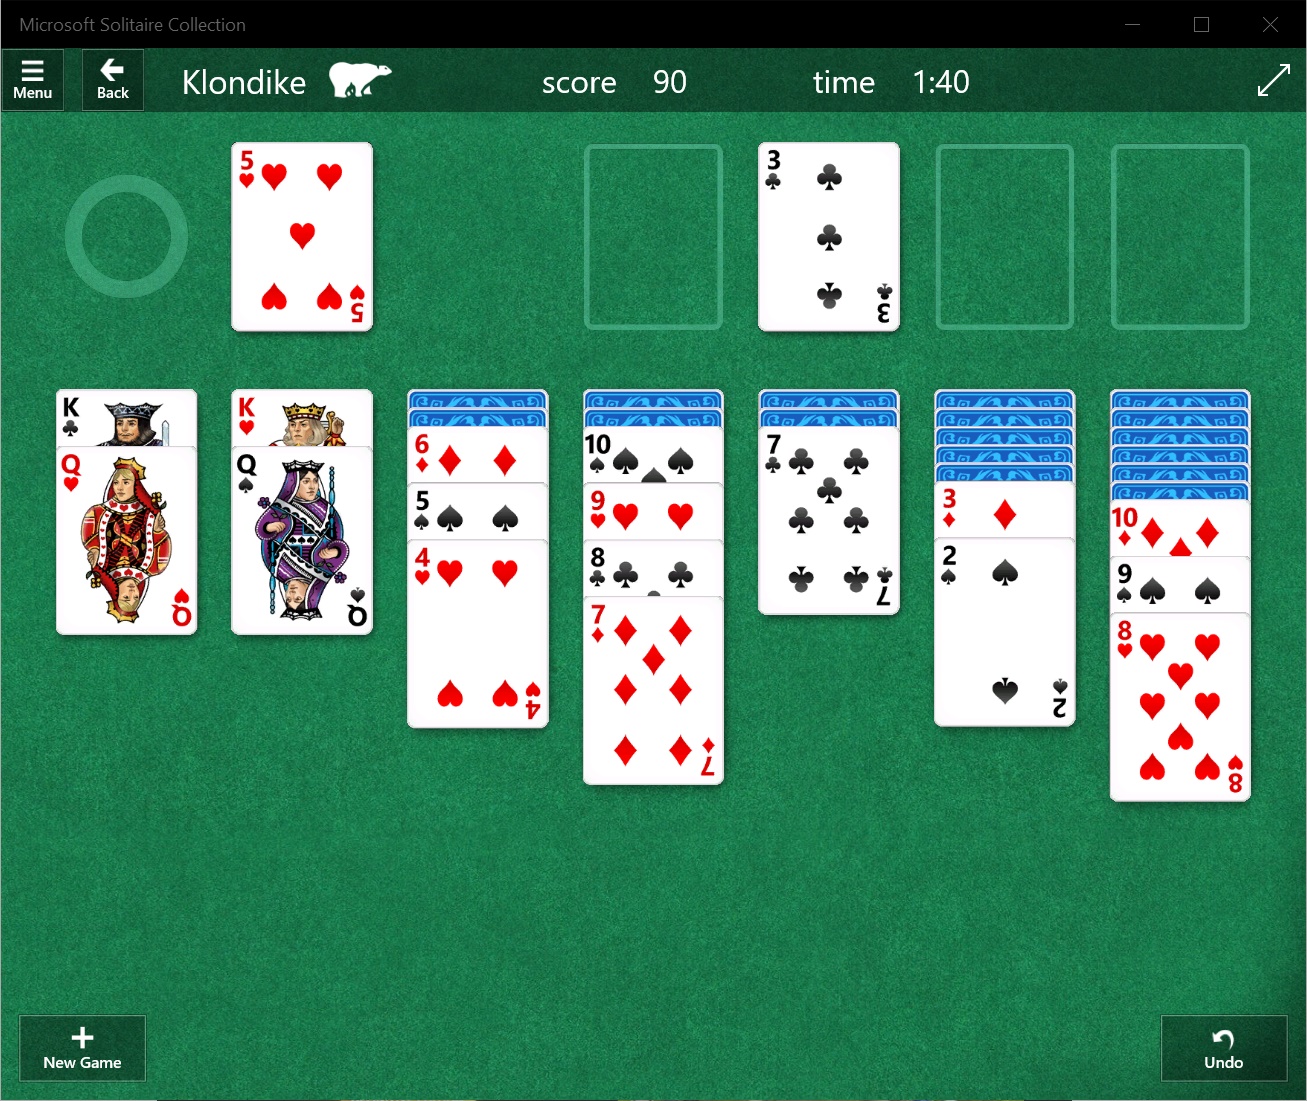 microsoft solitaire collection android if i uninstall and reinstall do i keep my data